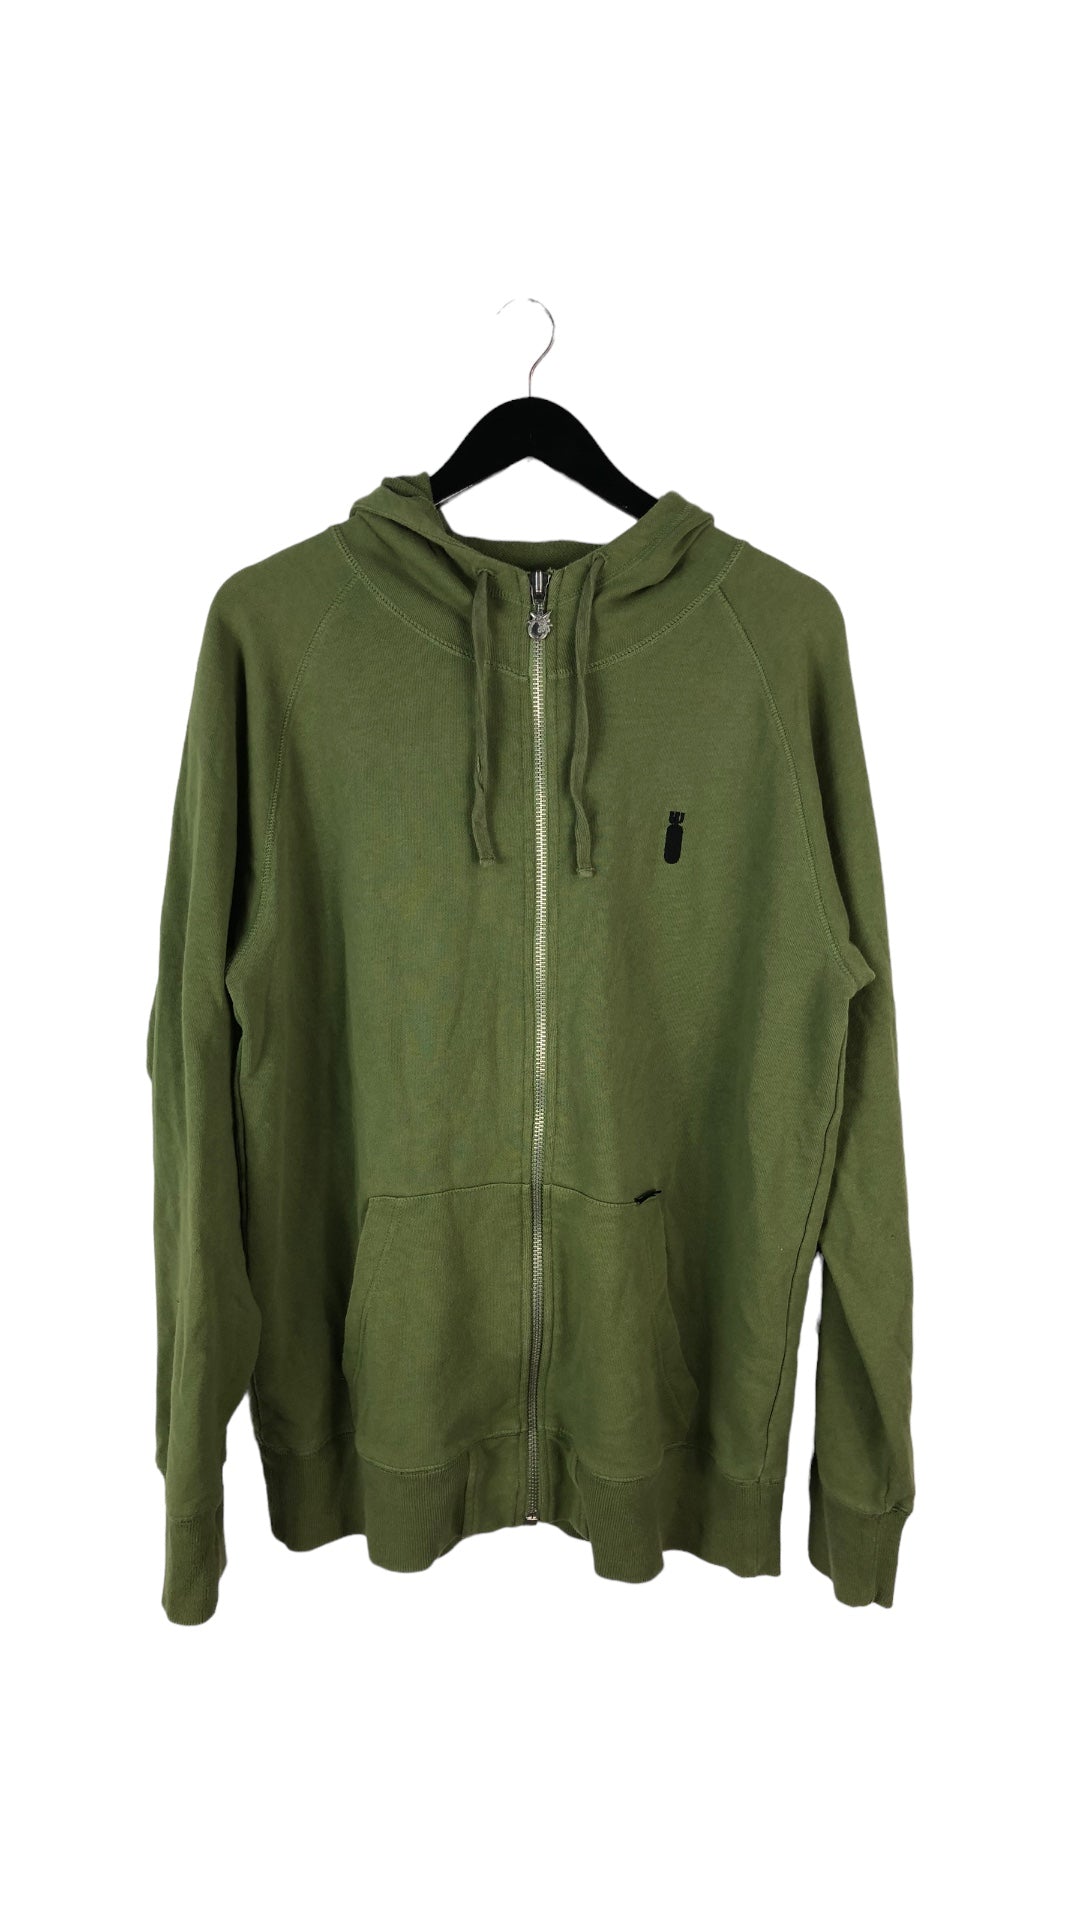 Load image into Gallery viewer, The Hundreds Green Zip Up Jacket Sz L
